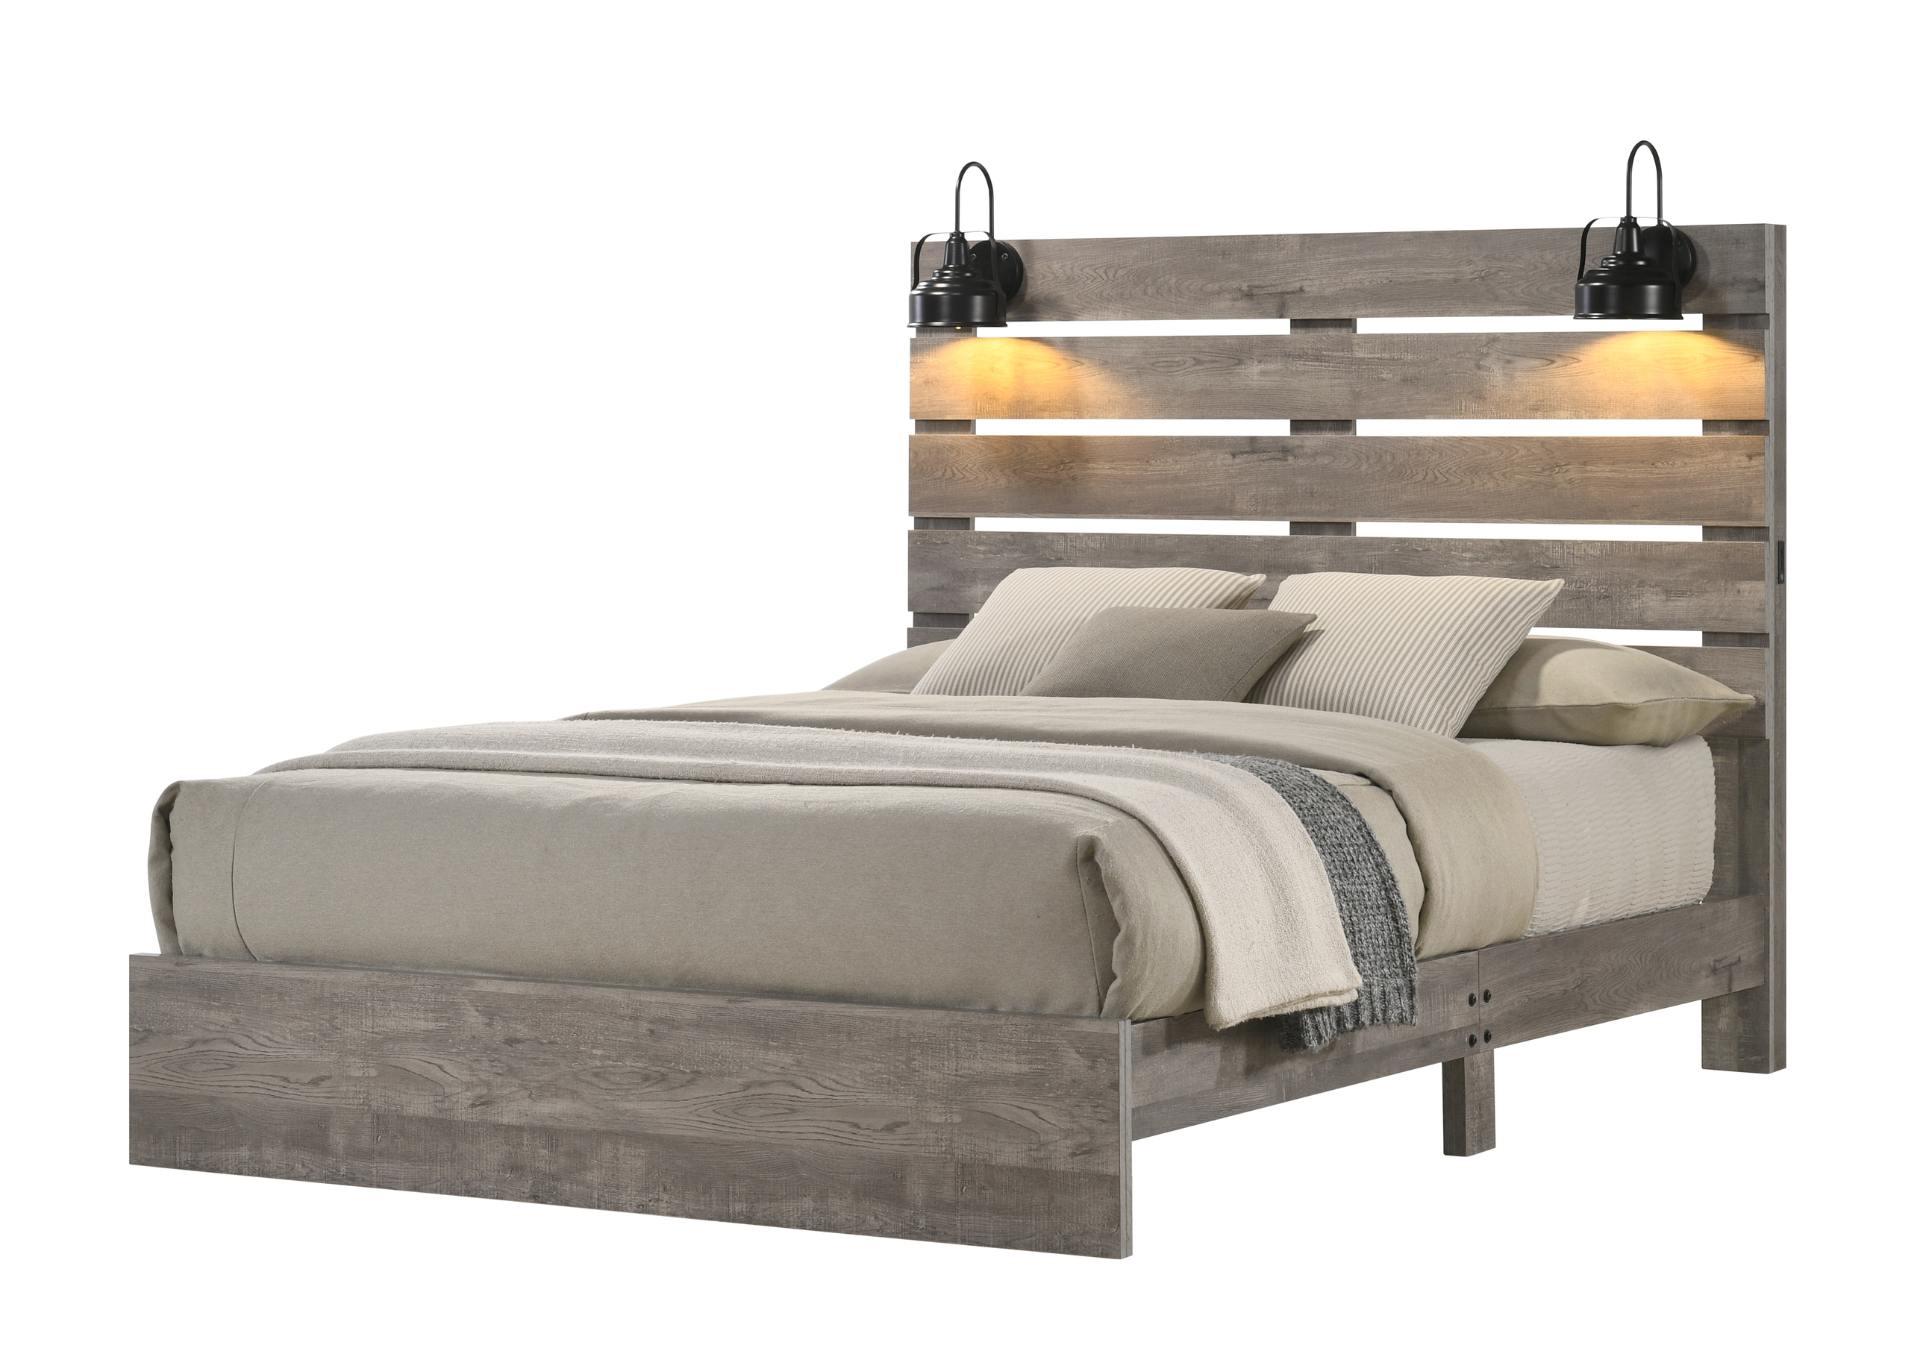 ARIANNA GREY FULL BED WITH LAMPS,LIFESTYLE FURNITURE